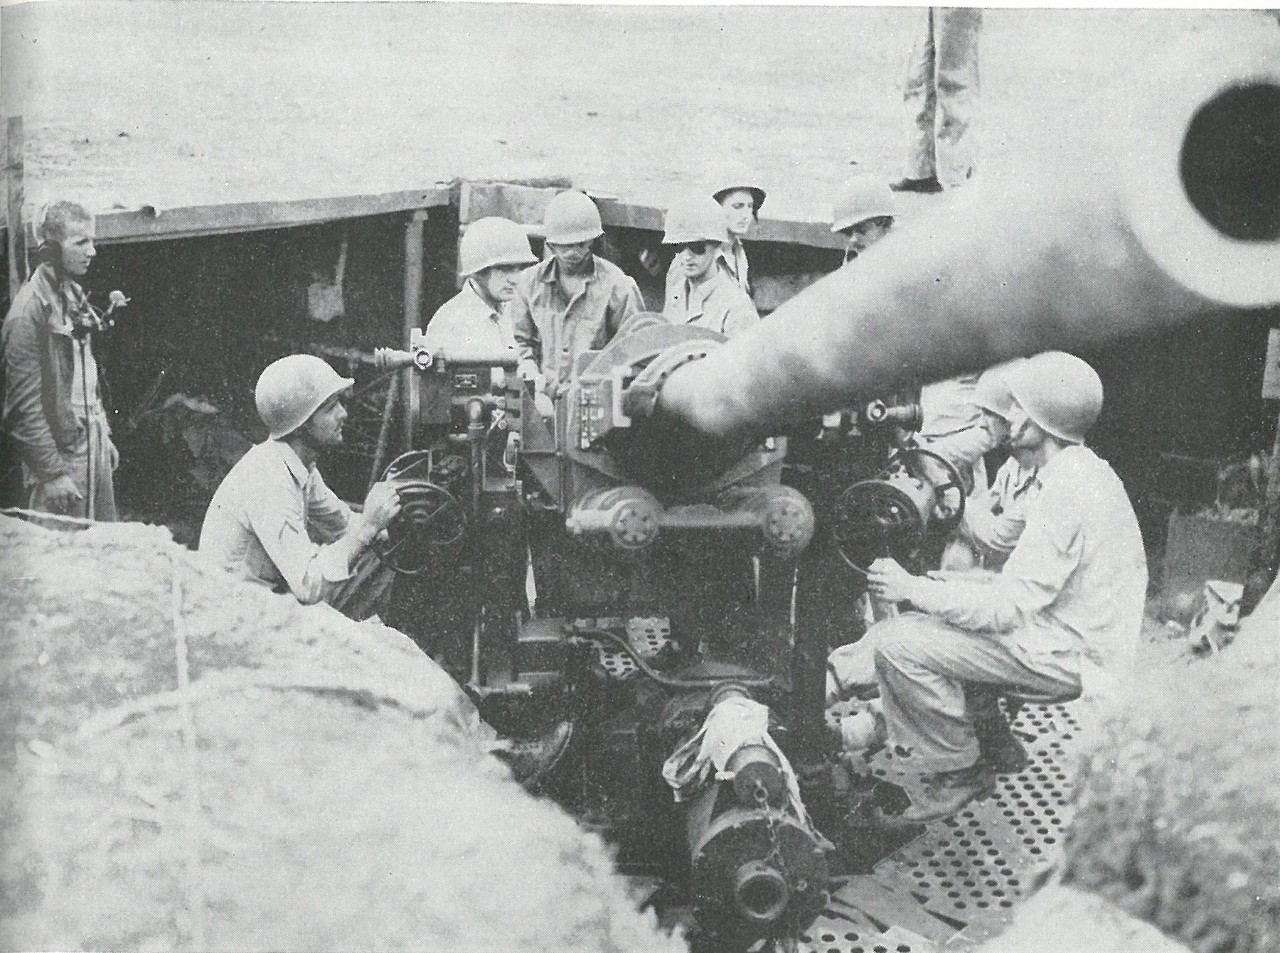 ANTIAIRCRAFT GUNNERS of the 3d Defense Battalion provided the sole air defense for Henderson Field during the critical hours while U.S. airplanes were grounded.